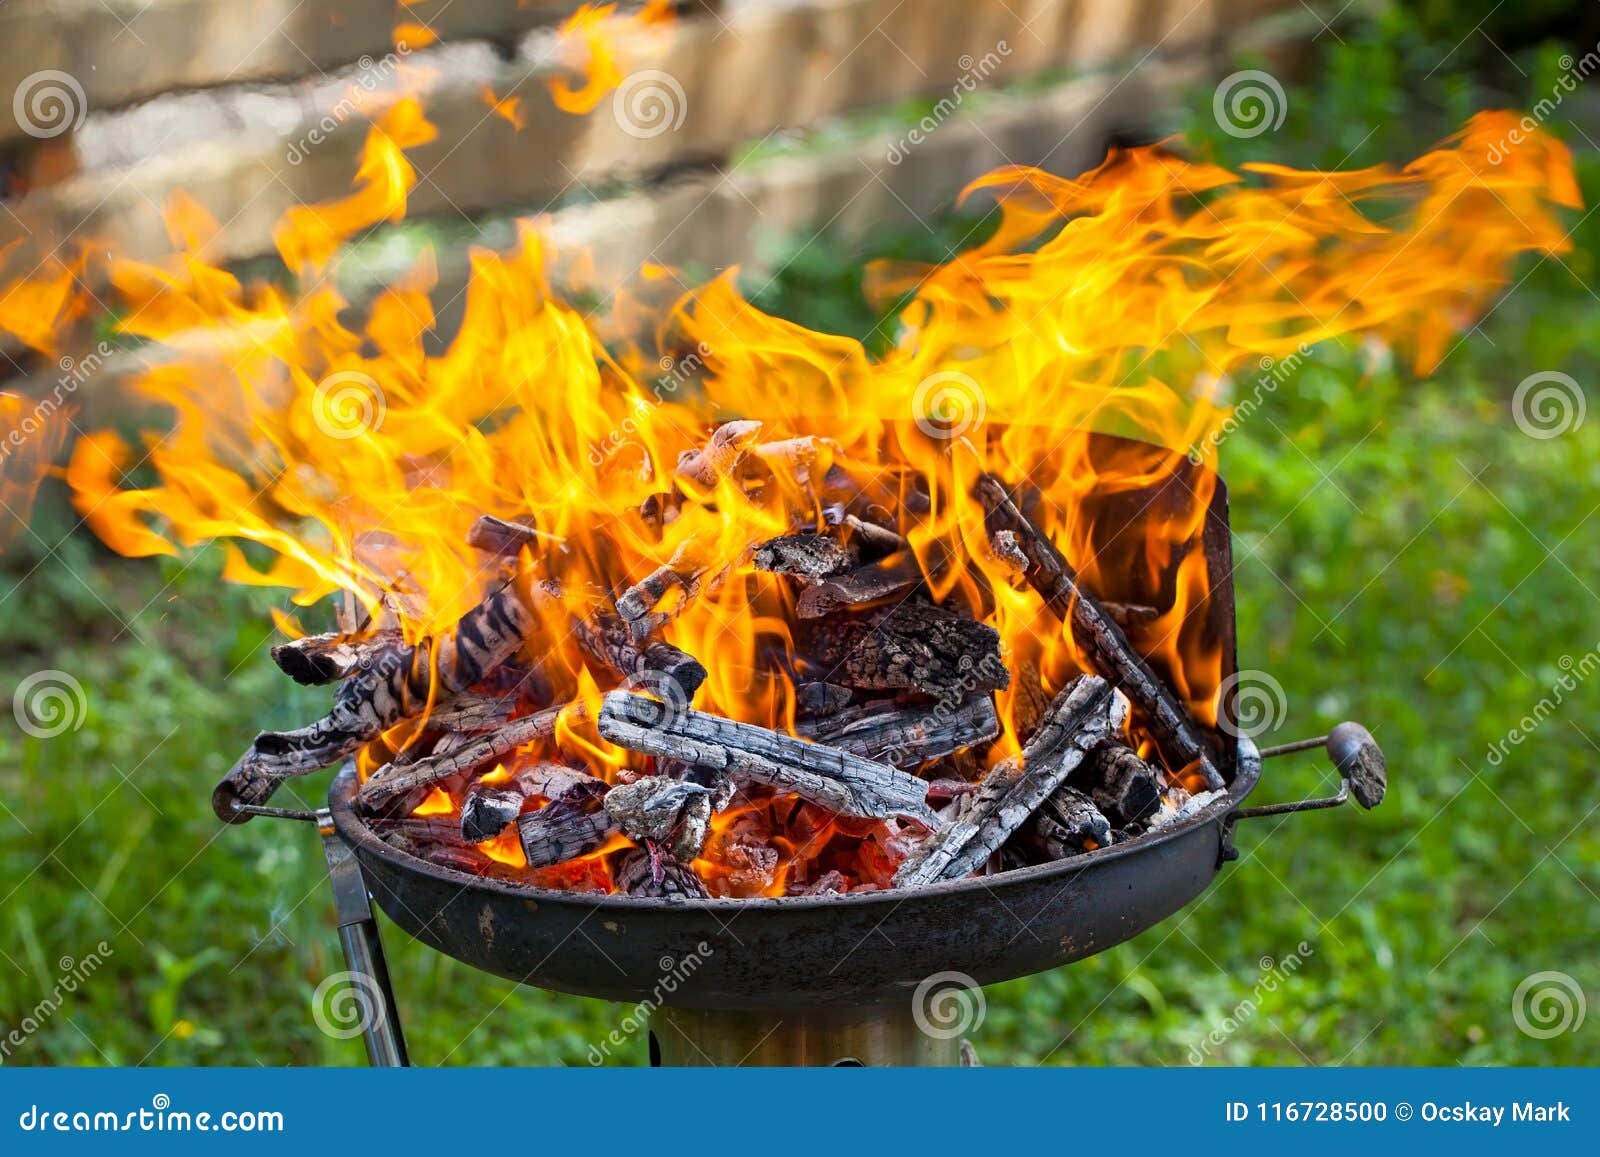 Barbeque fire stock photo. Image of burning, firewood - 116728500